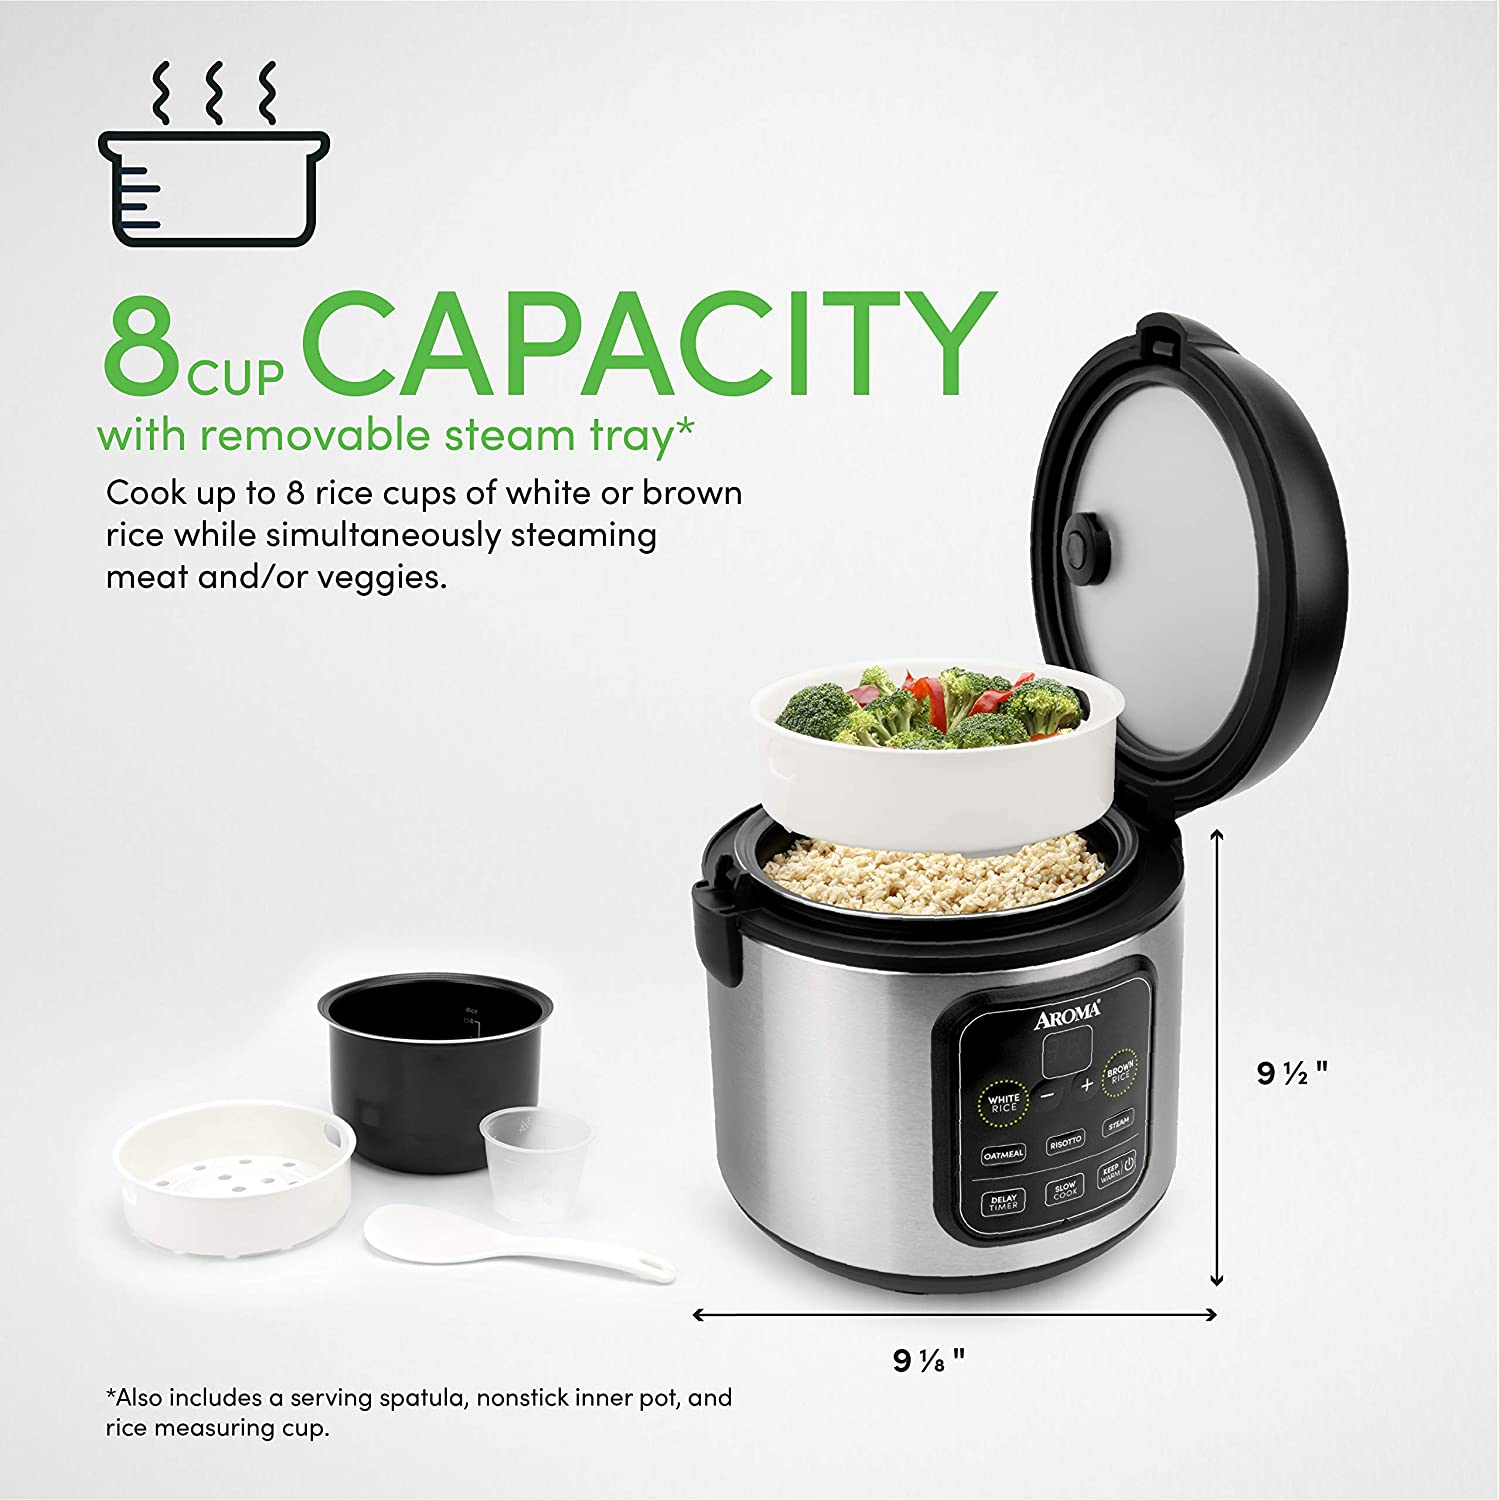 https://discounttoday.net/wp-content/uploads/2022/11/Aroma-Housewares-ARC-994SB-Rice-Grain-Cooker-Slow-Cook-Steam-Oatmeal-Risotto-8-cup-cooked-4-cup-uncooked-2Qt-Stainless-Steel3.jpg